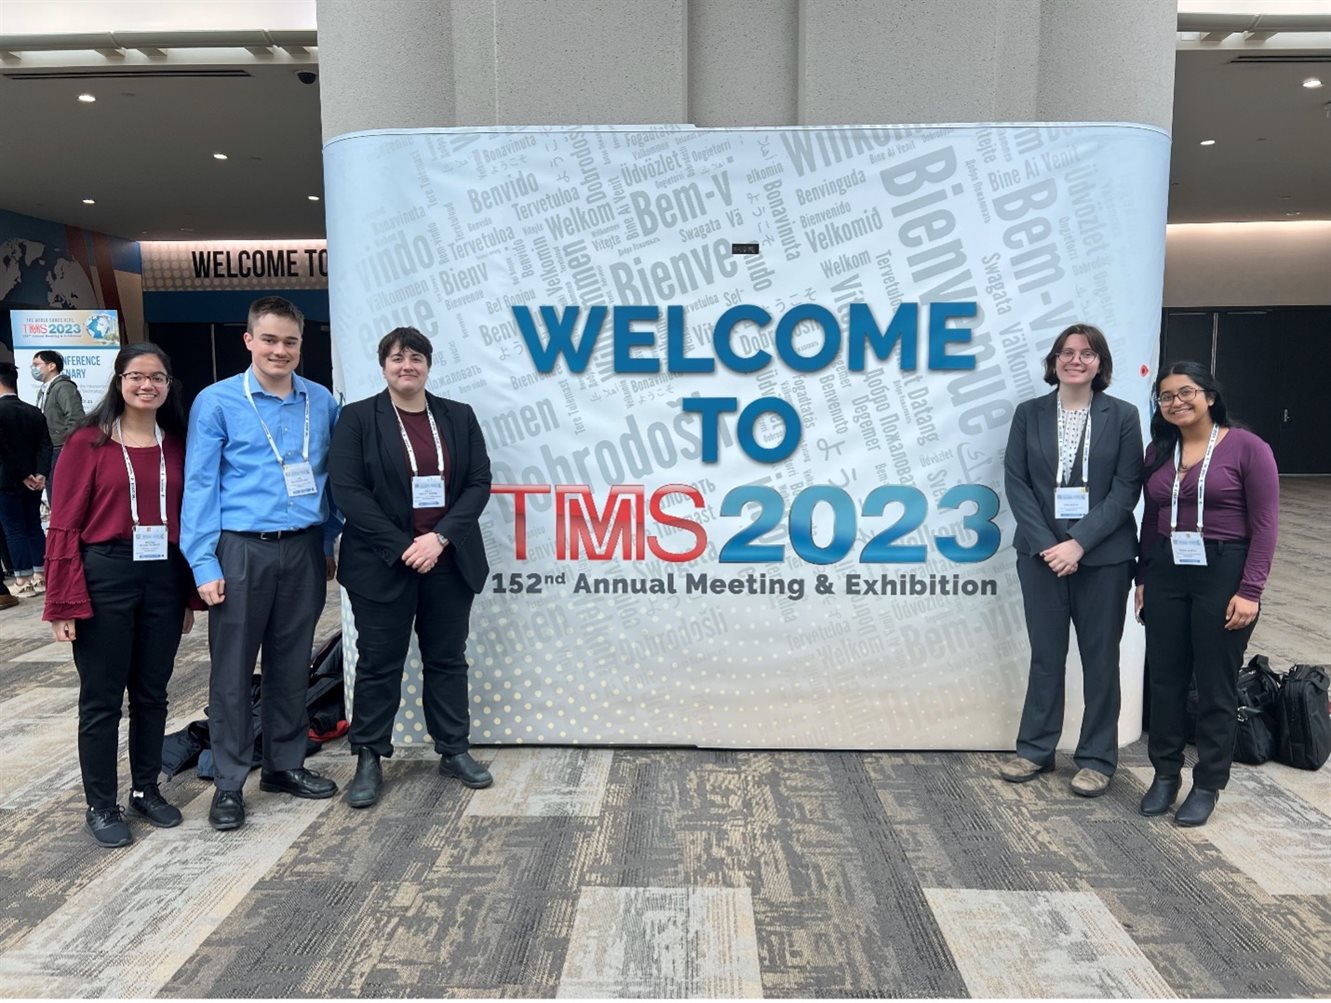 The Illinois team poses for a photo at the TMS annual Meeting and Exhibition at the San Diego Convention Center and Hilton San Diego Bayfront in San Diego, Calif earlier in March. Picturesd, from left, are Regina Raemsch, Jac Copeland, Abby Sreden, Kira Martin, Krisha Sampat.